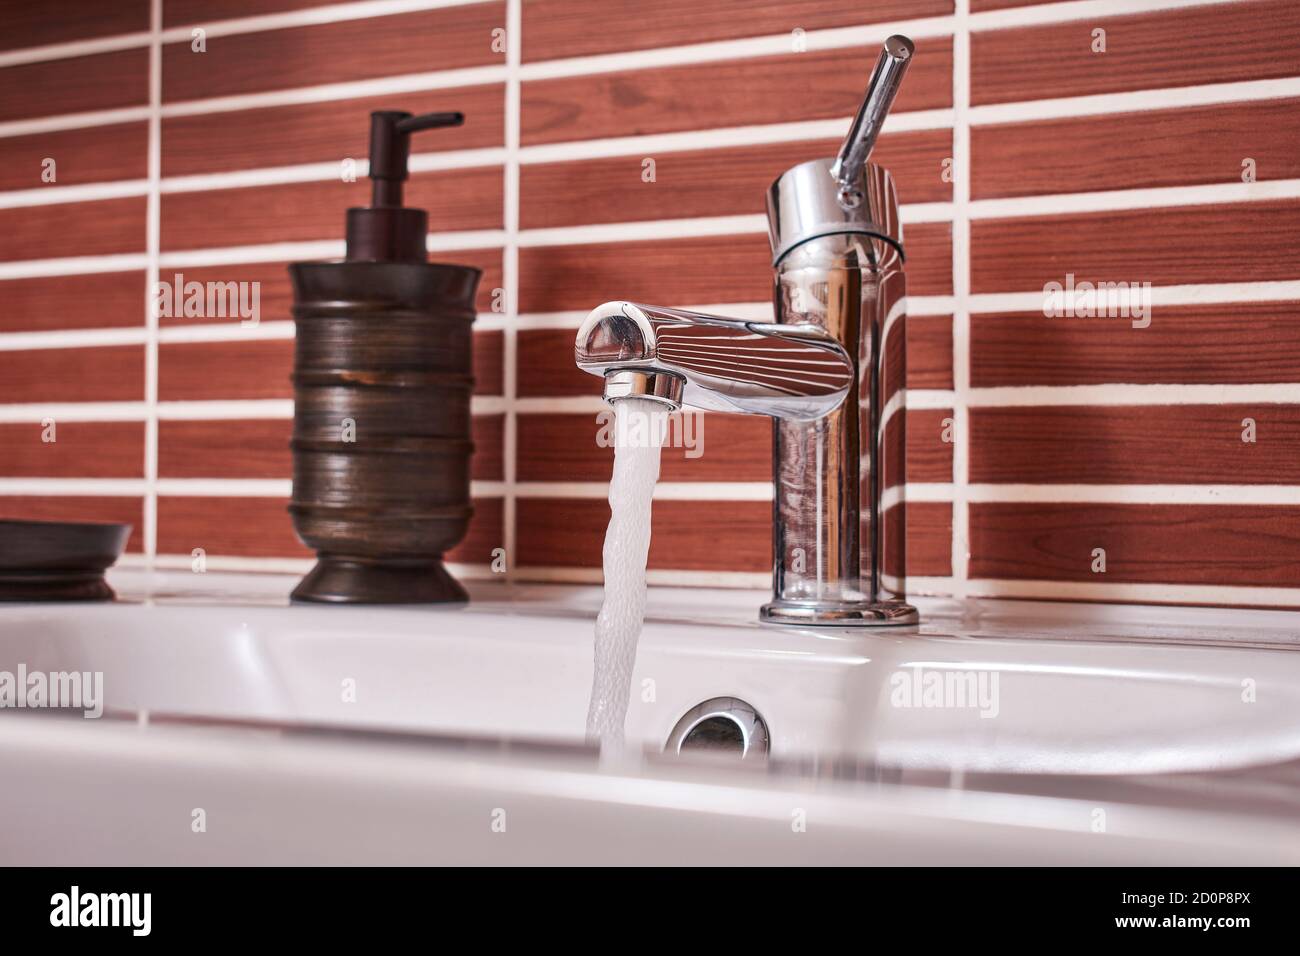 Open bathroom faucet wasting water in an action against the care of the environment Stock Photo